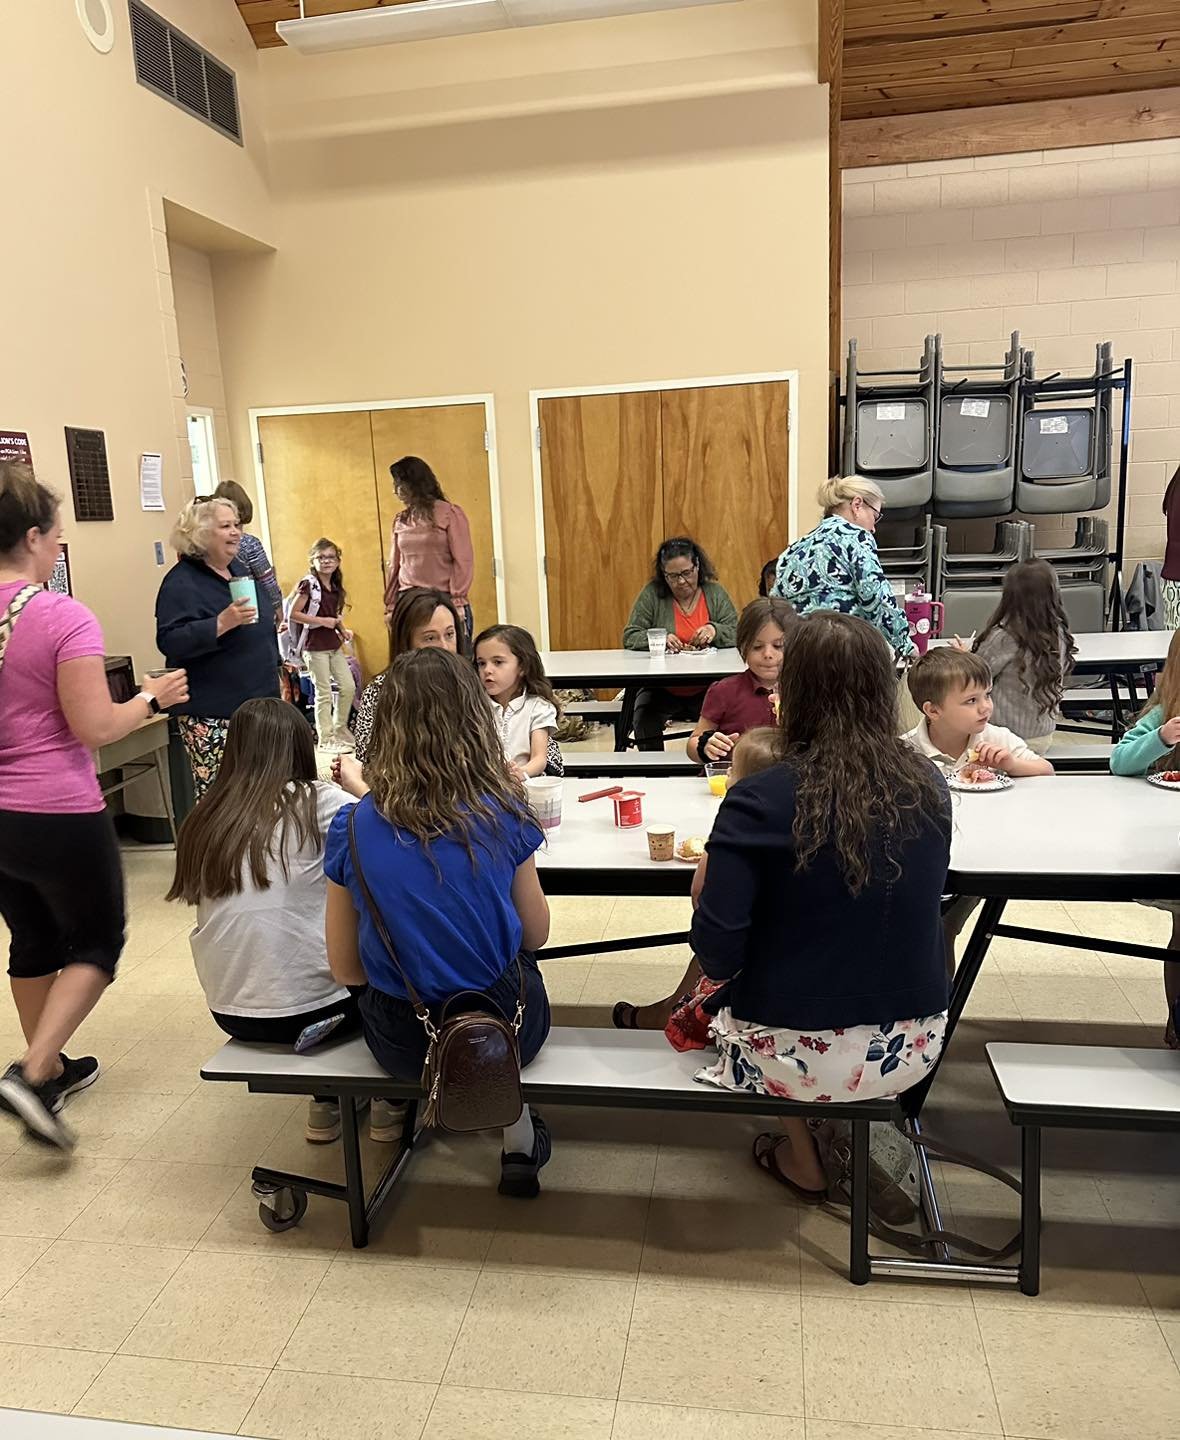 Muffins with Mum was such a fun event! It was wonderful for all the mothers and grandmothers to be able to enjoy breakfast with their students before heading to school and work. 🌸☀️ #fca #school #mom #grandma #mum #muffins